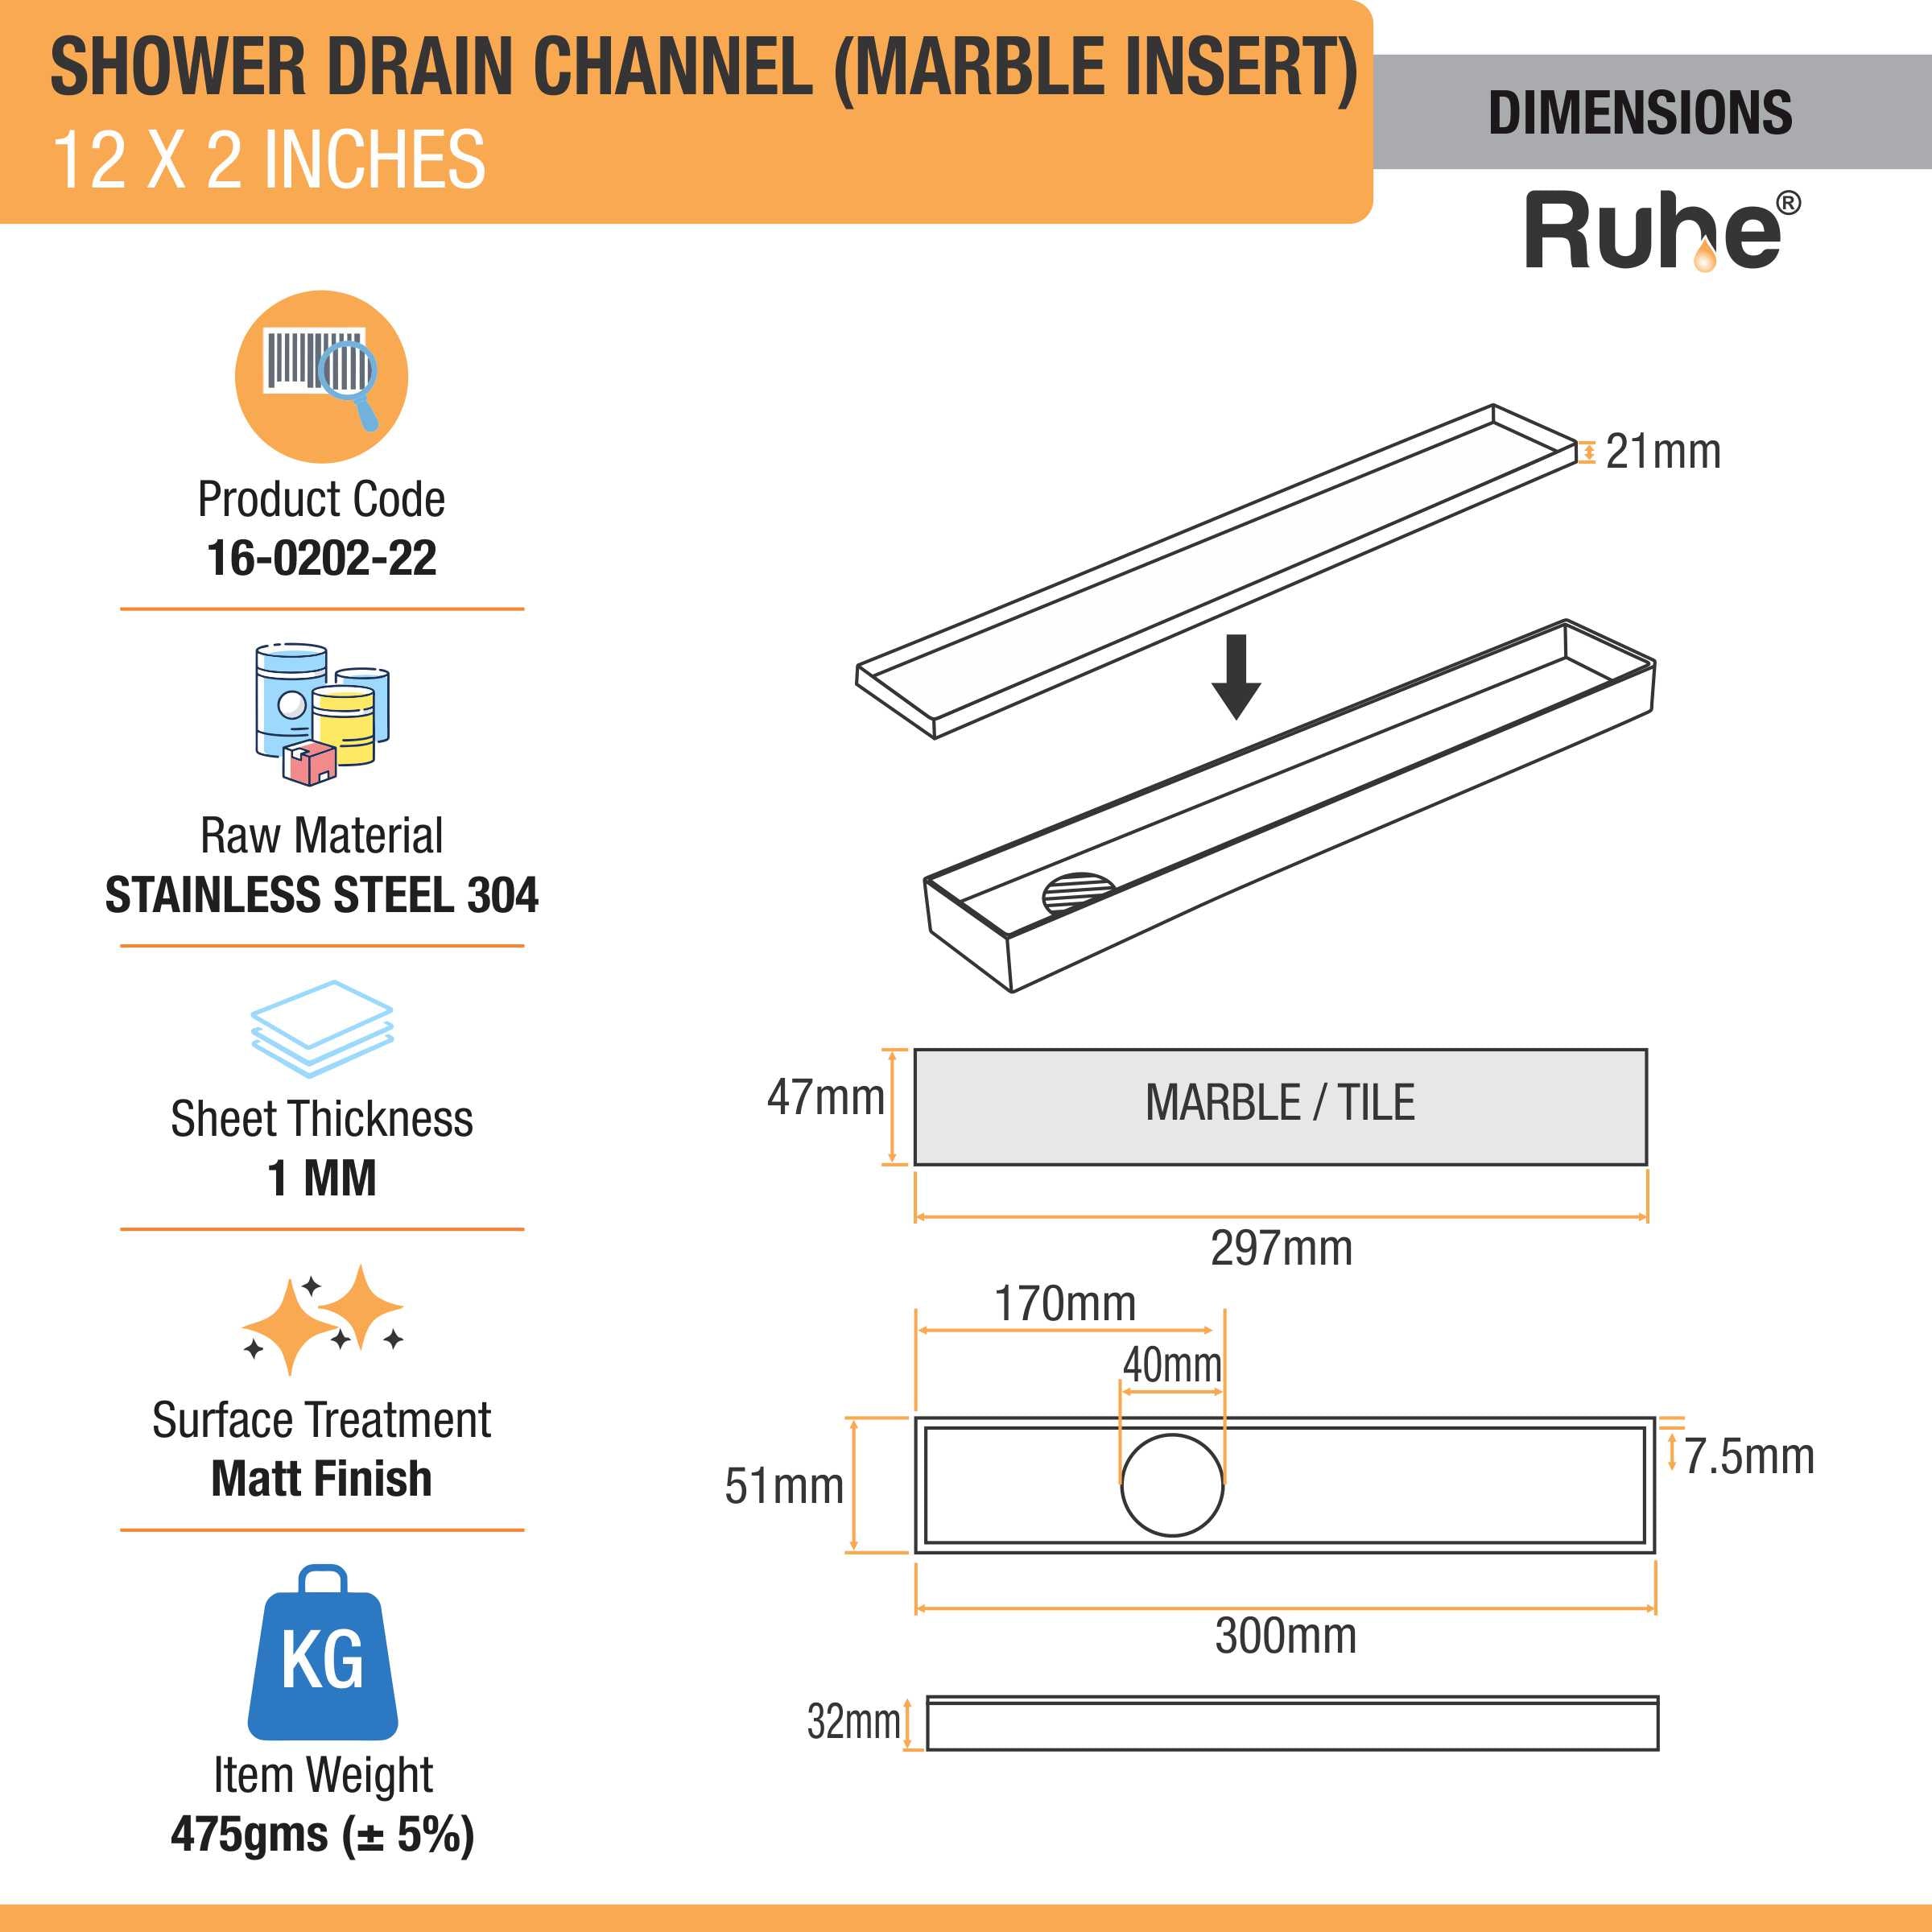 Marble Insert Shower Drain Channel (12 x 2 Inches) (304 Grade) dimensions and size